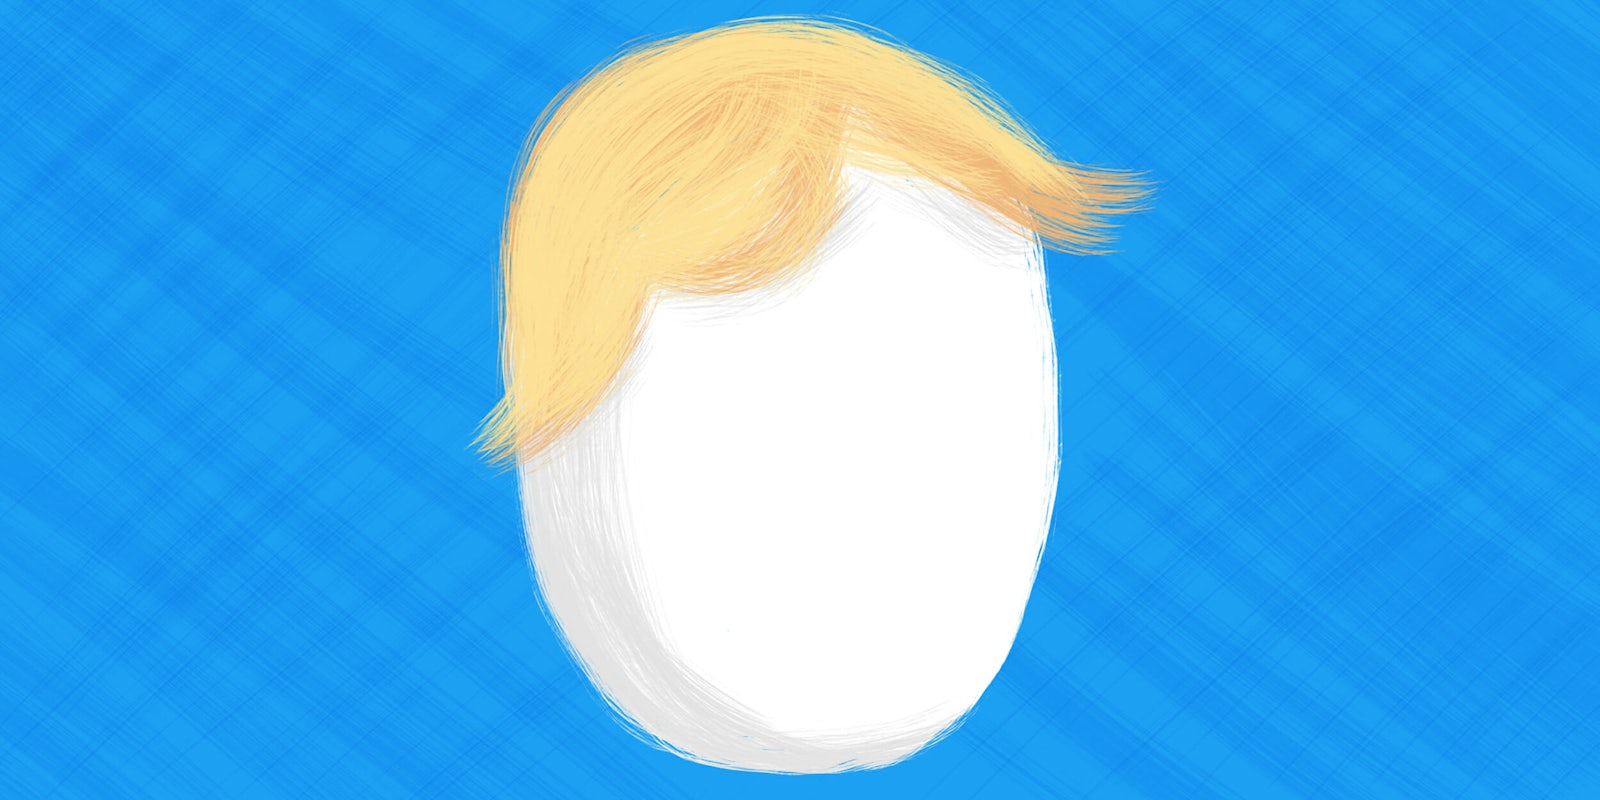 Illustration of a Twitter 'egg' avatar with Trump's hair